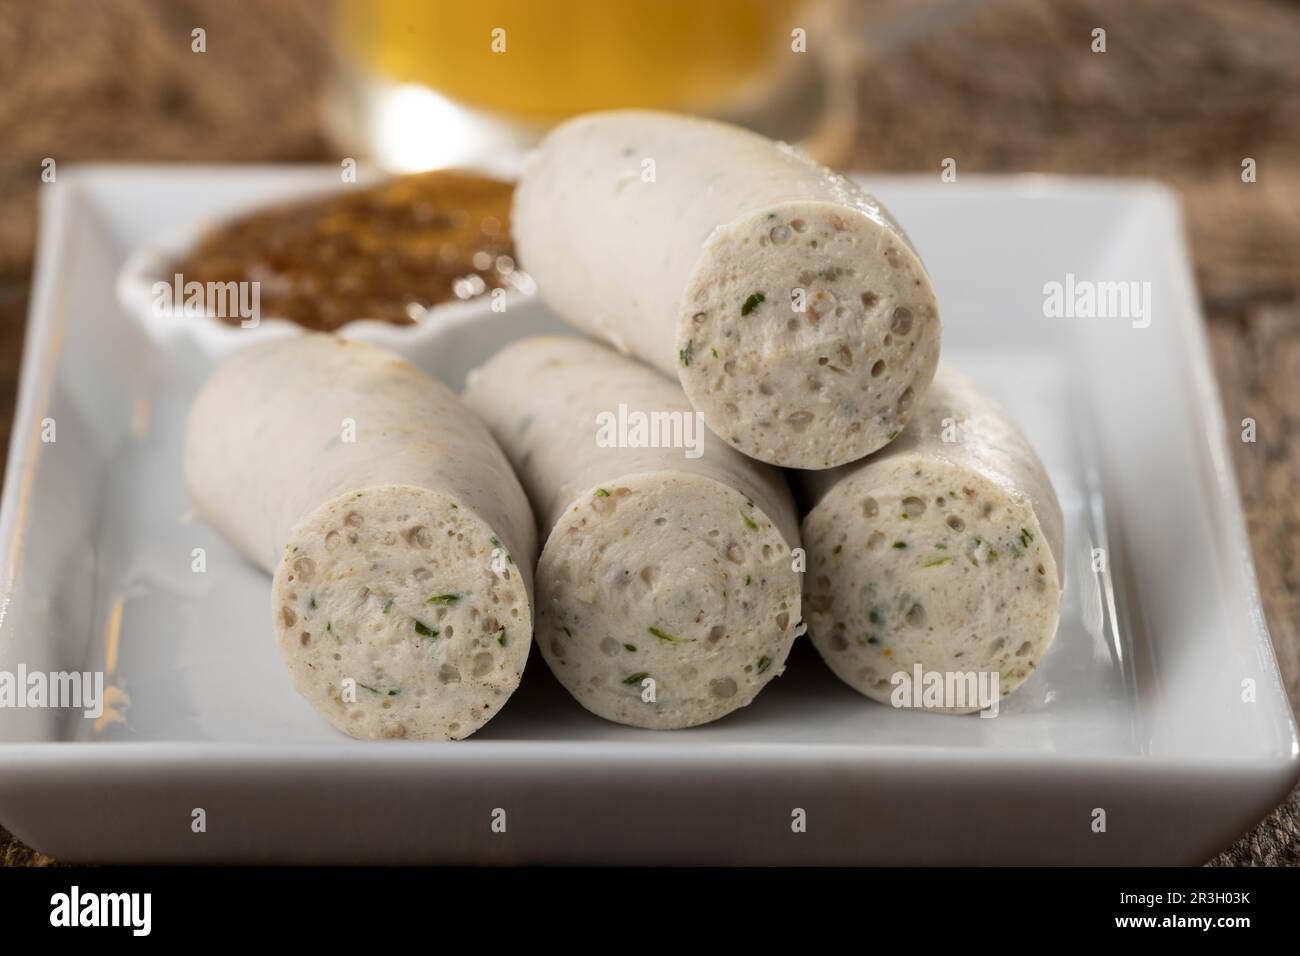 Bavarian veal sausage on a plate Stock Photo